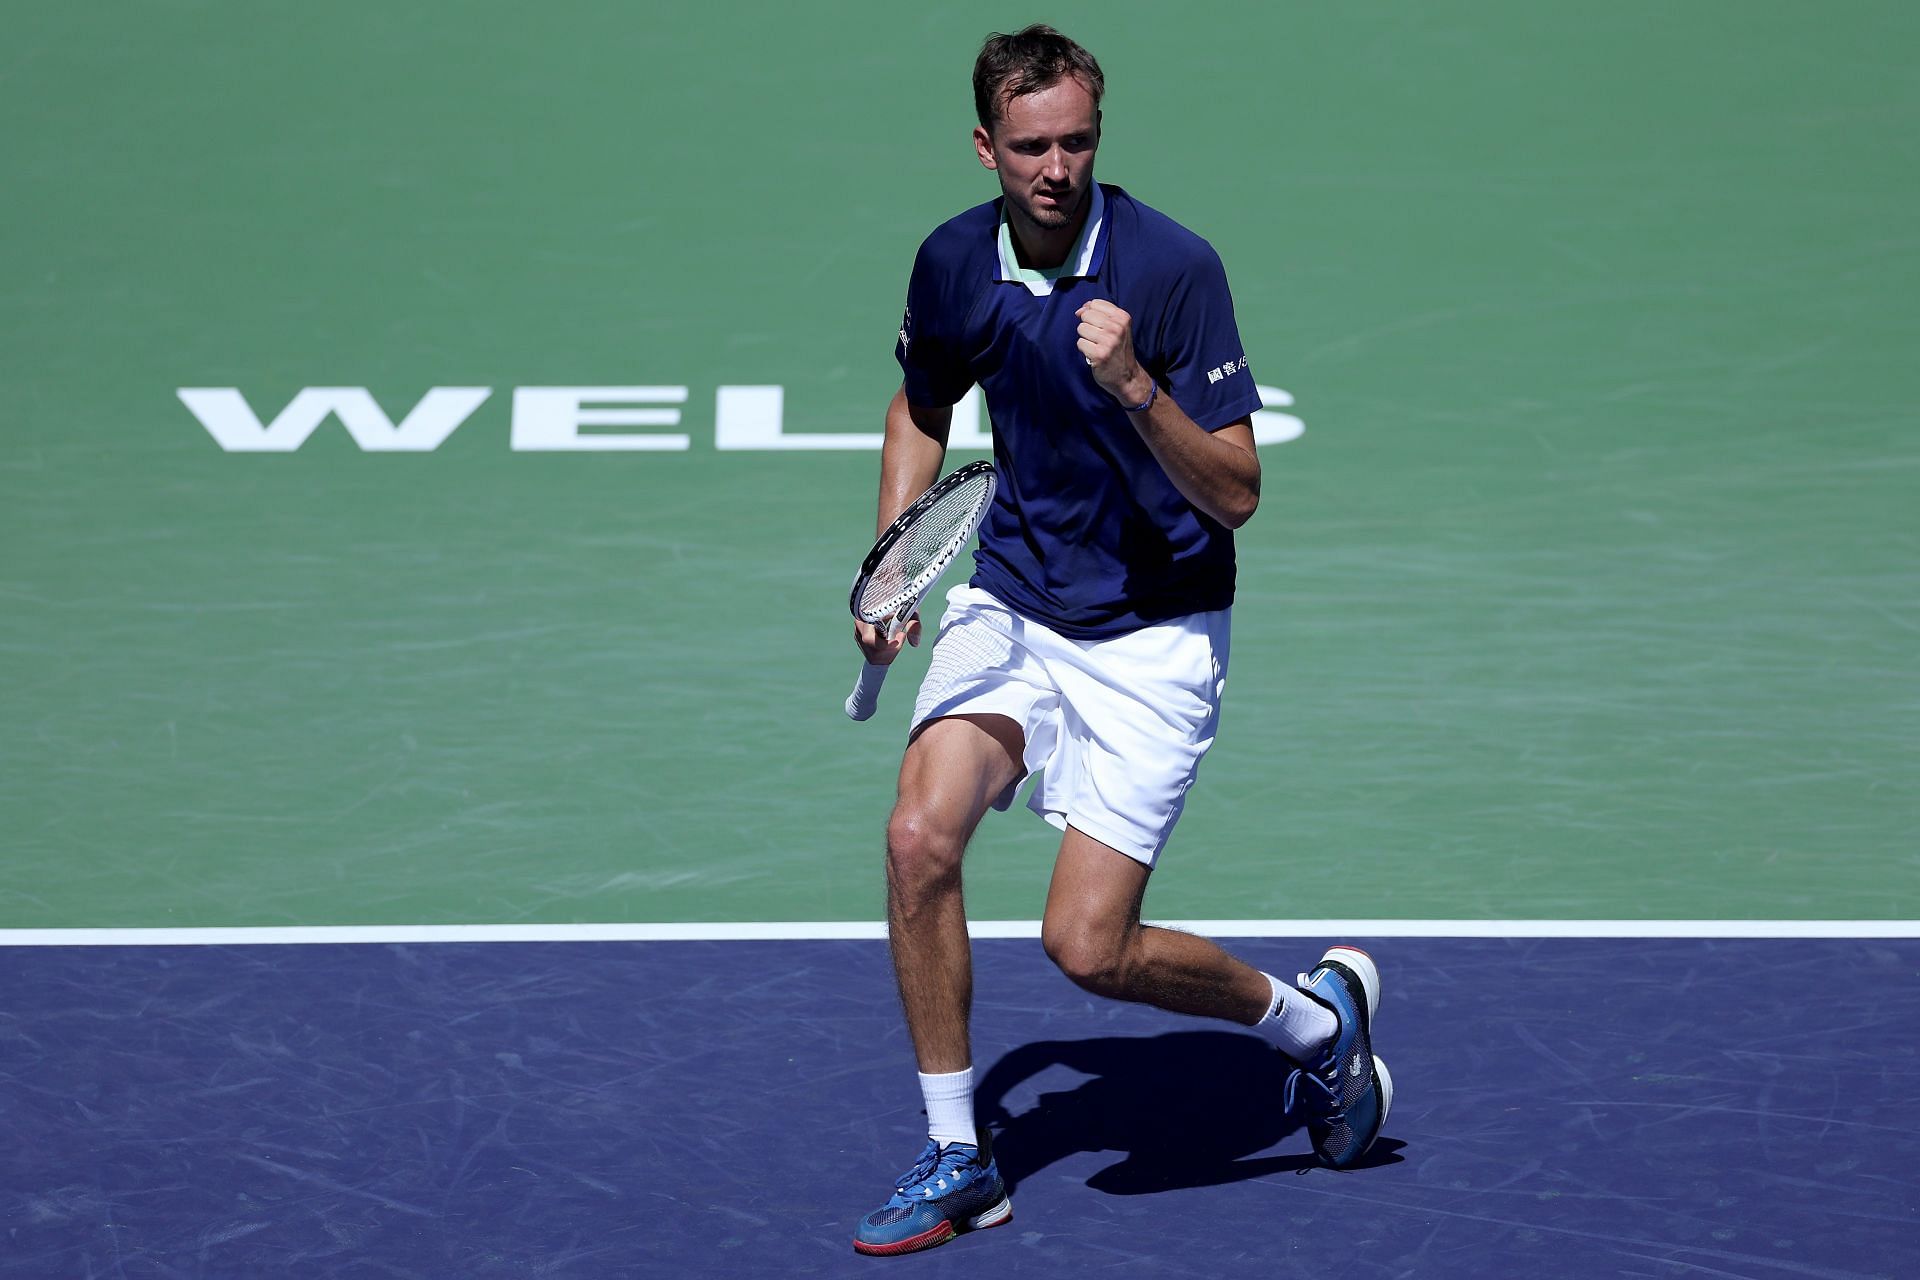 Medvedev at the 2022 Indian Wells Masters